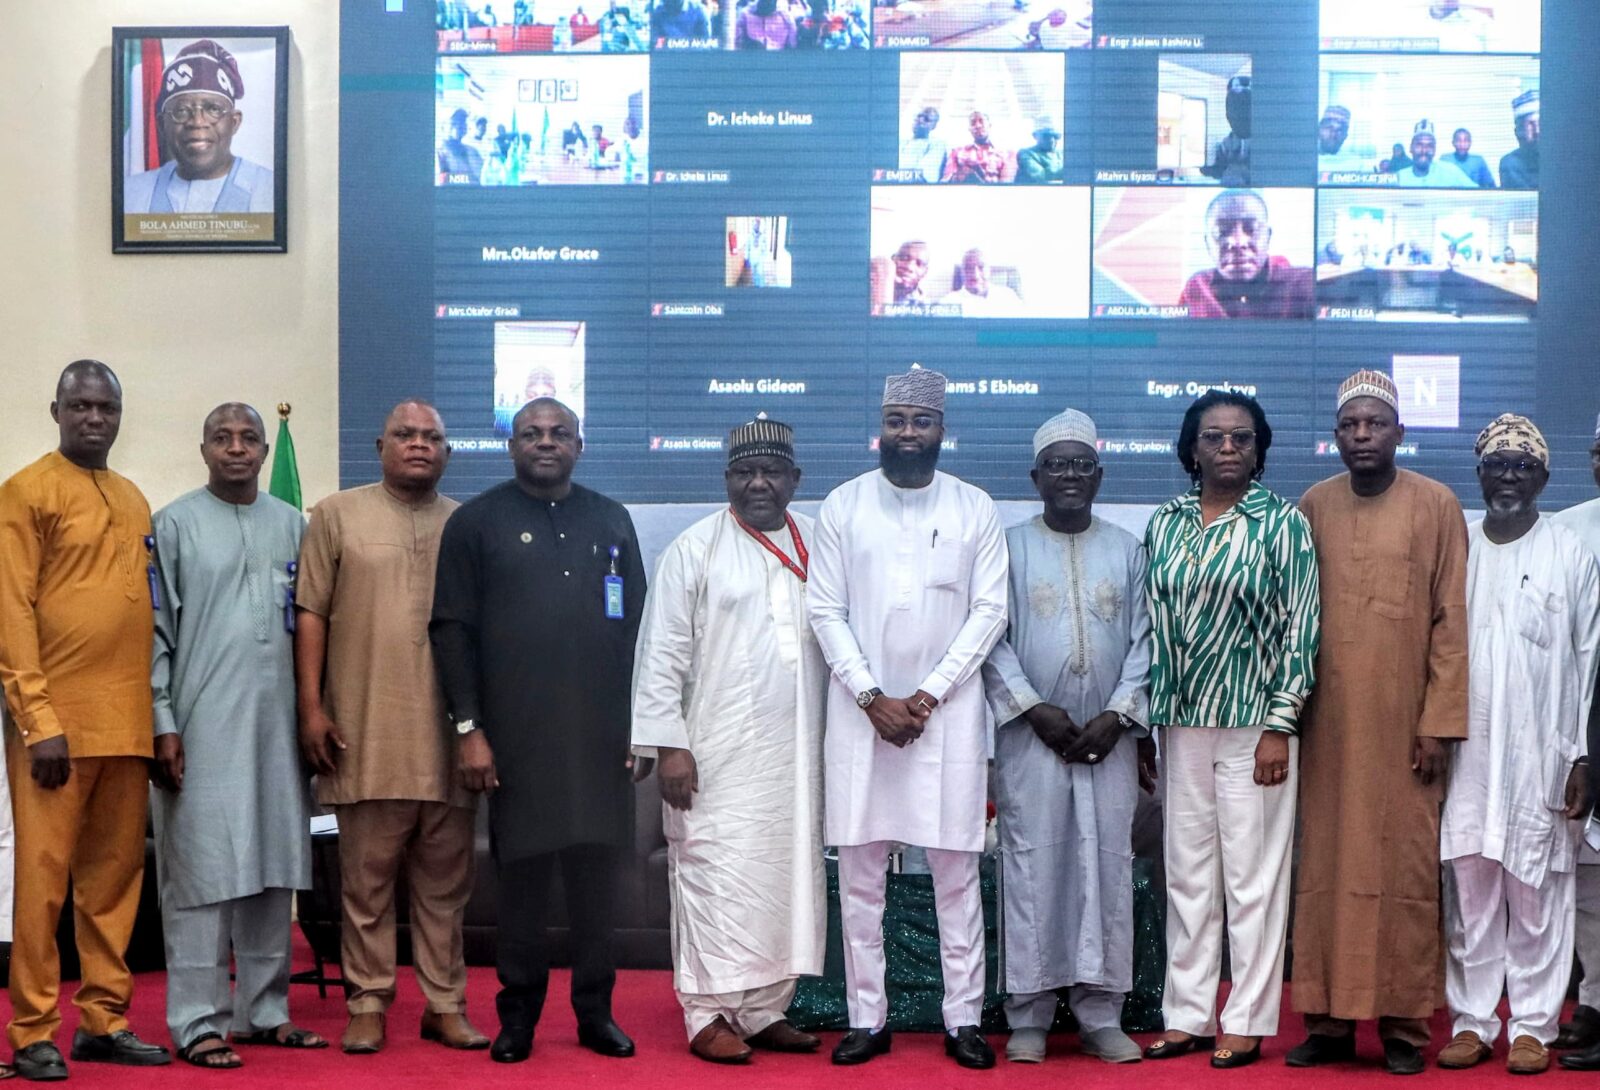 Left to Right: Principal Data Officer, Bureau of Public Service Reforms (BPSR), Mr. Goodluck Ayerota ; Ag. Head, Strategic Communications BPSR, Mr. Aliyu Umar; Principal Admin Officer, BPSR, Mr. Anthony Asemah; SAT Desk Officer, BPSR, Mr. Felix Izenyi; the Director General, BPSR, Mr. Dasuki Ibrahim Arabi; the Executive Vice Chairman/CEO, National Agency for Science and Engineering Infrastructure (NASENI), Mr. Khalil Suleiman Halilu; Director of Finance and Accounts, NASENI, Mr. Jibrin Rajab Haske; Coordinating Director,. Planning and Business Development, NASENI, Mrs. Nonyem Onyechi and Coordinating Director, Science Infrastructure, NASENI, Prof. Umar Ibrahim Gaya during the opening ceremony of the mandatory deployment of self assessment tools (SAT) at the NASENI Headquarters, Abuja on Monday, 12th February, 2024.